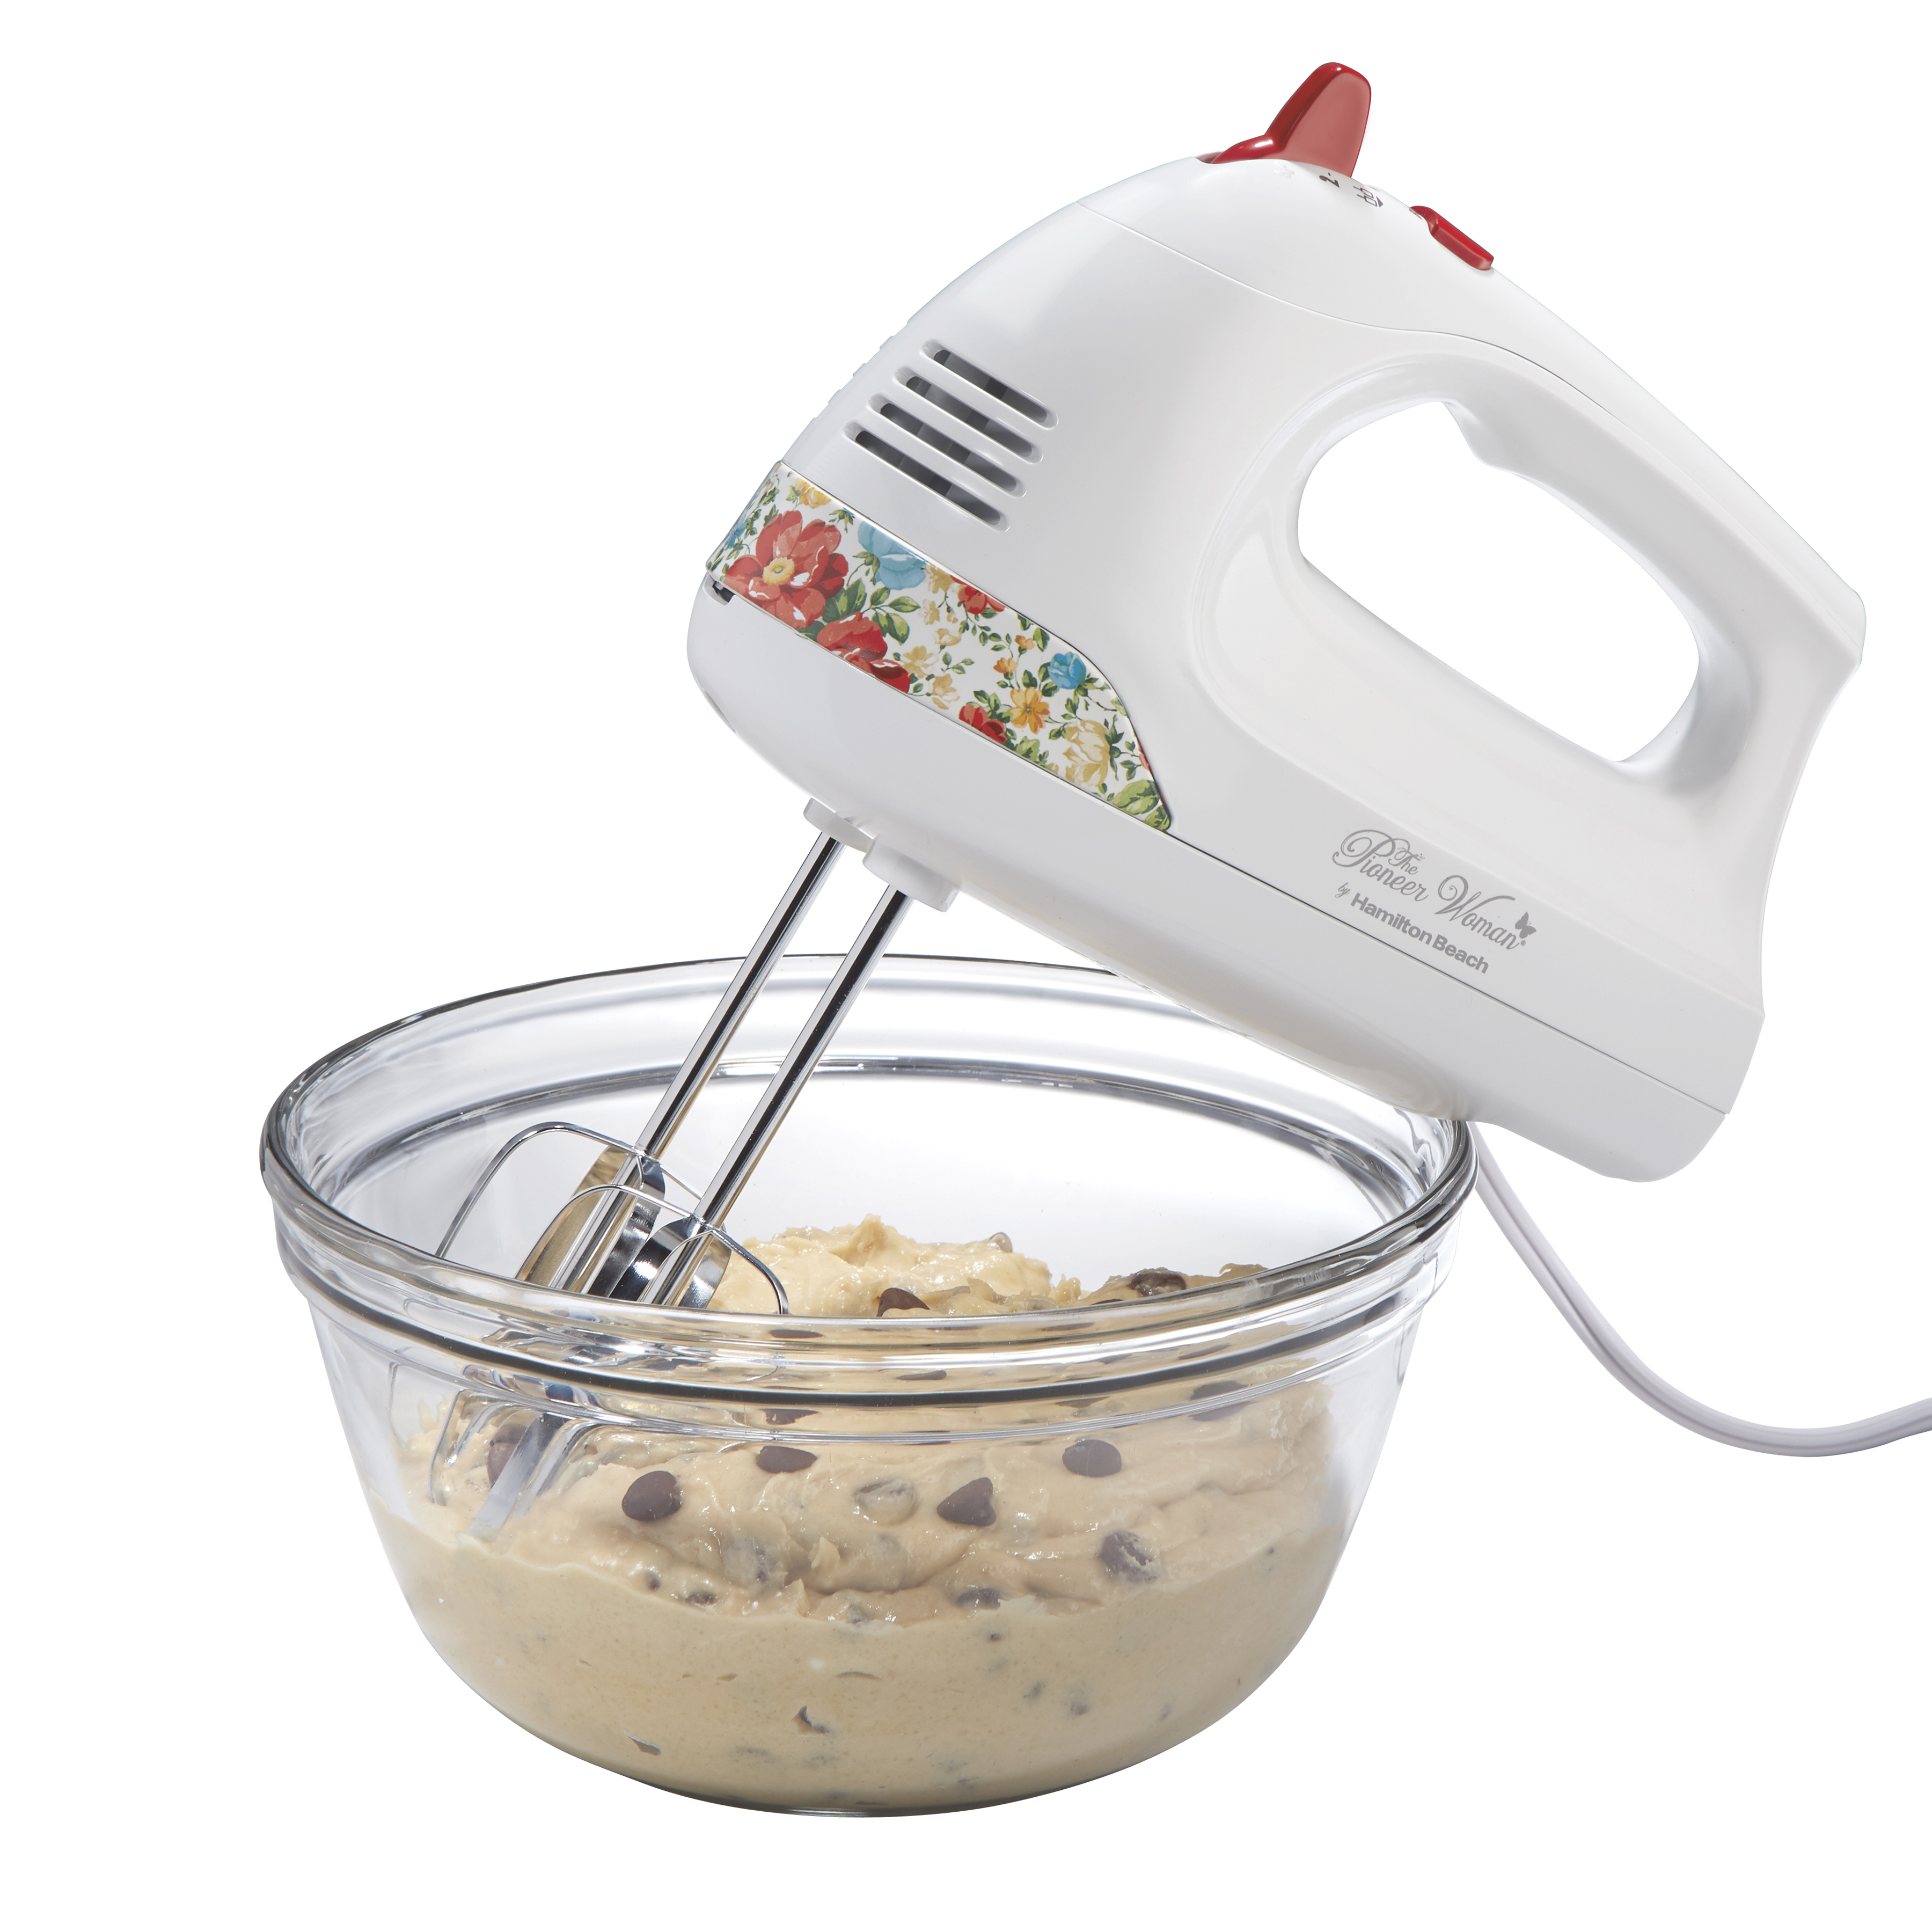 The Pioneer Woman 6-Speed Hand Mixer with Vintage Floral Design and Snap-On Case - image 4 of 7